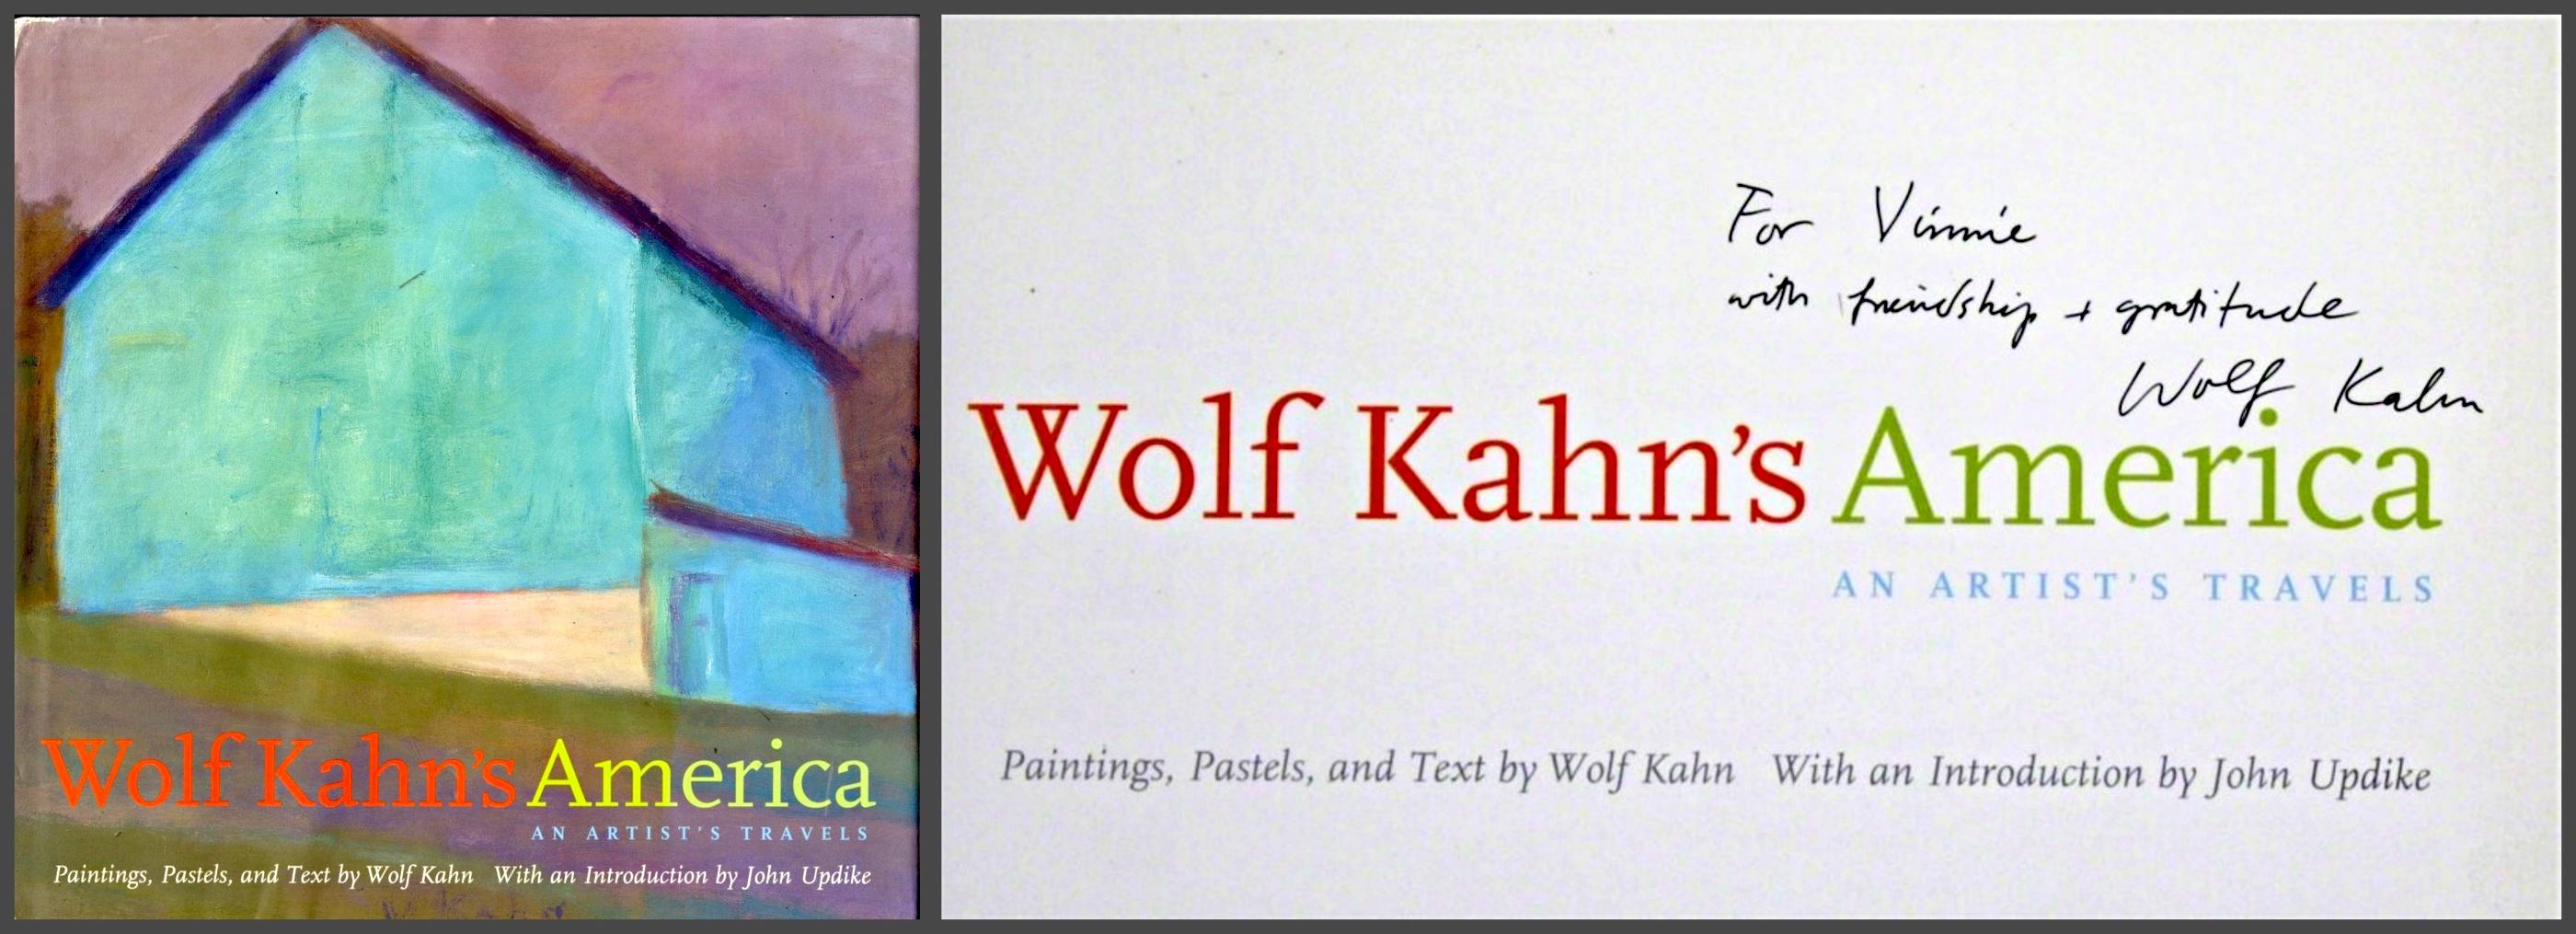 Wolf Kahn
Wolf Kahn's America (Hand signed and inscribed), 2003
Hand signed and dedicated hardback monograph with dust jacket
Boldly signed in ink with heartfelt personal dedication on title page inside
10 1/5 × 10 1/5 inches
Lovely hardback